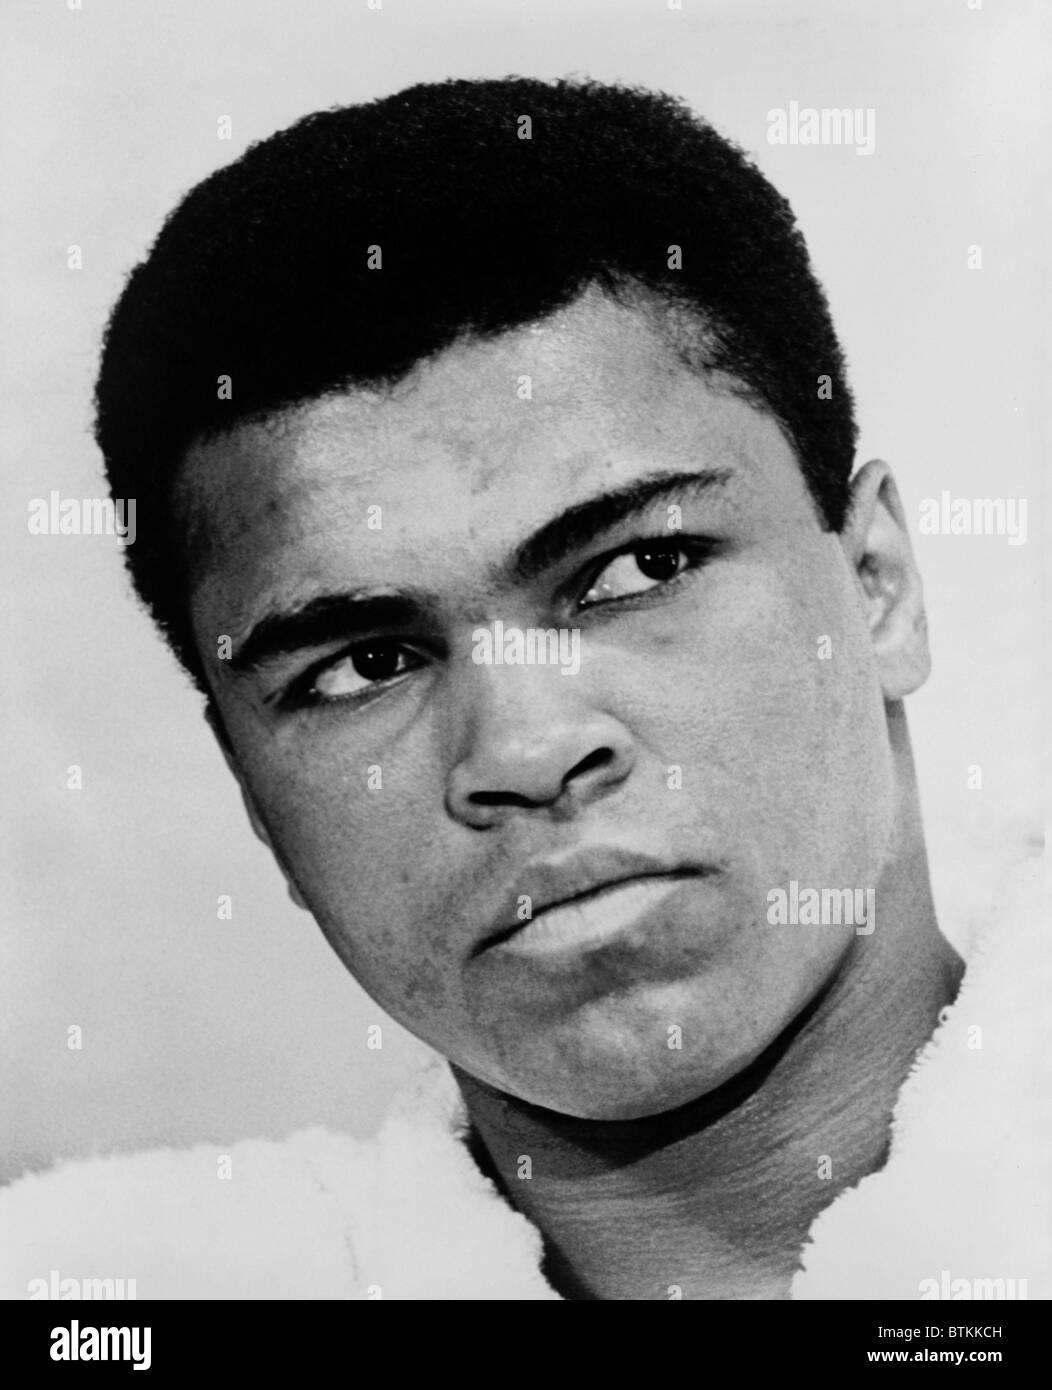 Muhammad Ali (b. 1942), in 1967, the year he refused induction into the U.S. military. He was found guilty on draft evasion charges, stripped of his boxing title and did not fight for nearly four years, until his conviction was reversed by the U.S. Supreme Court. Stock Photo